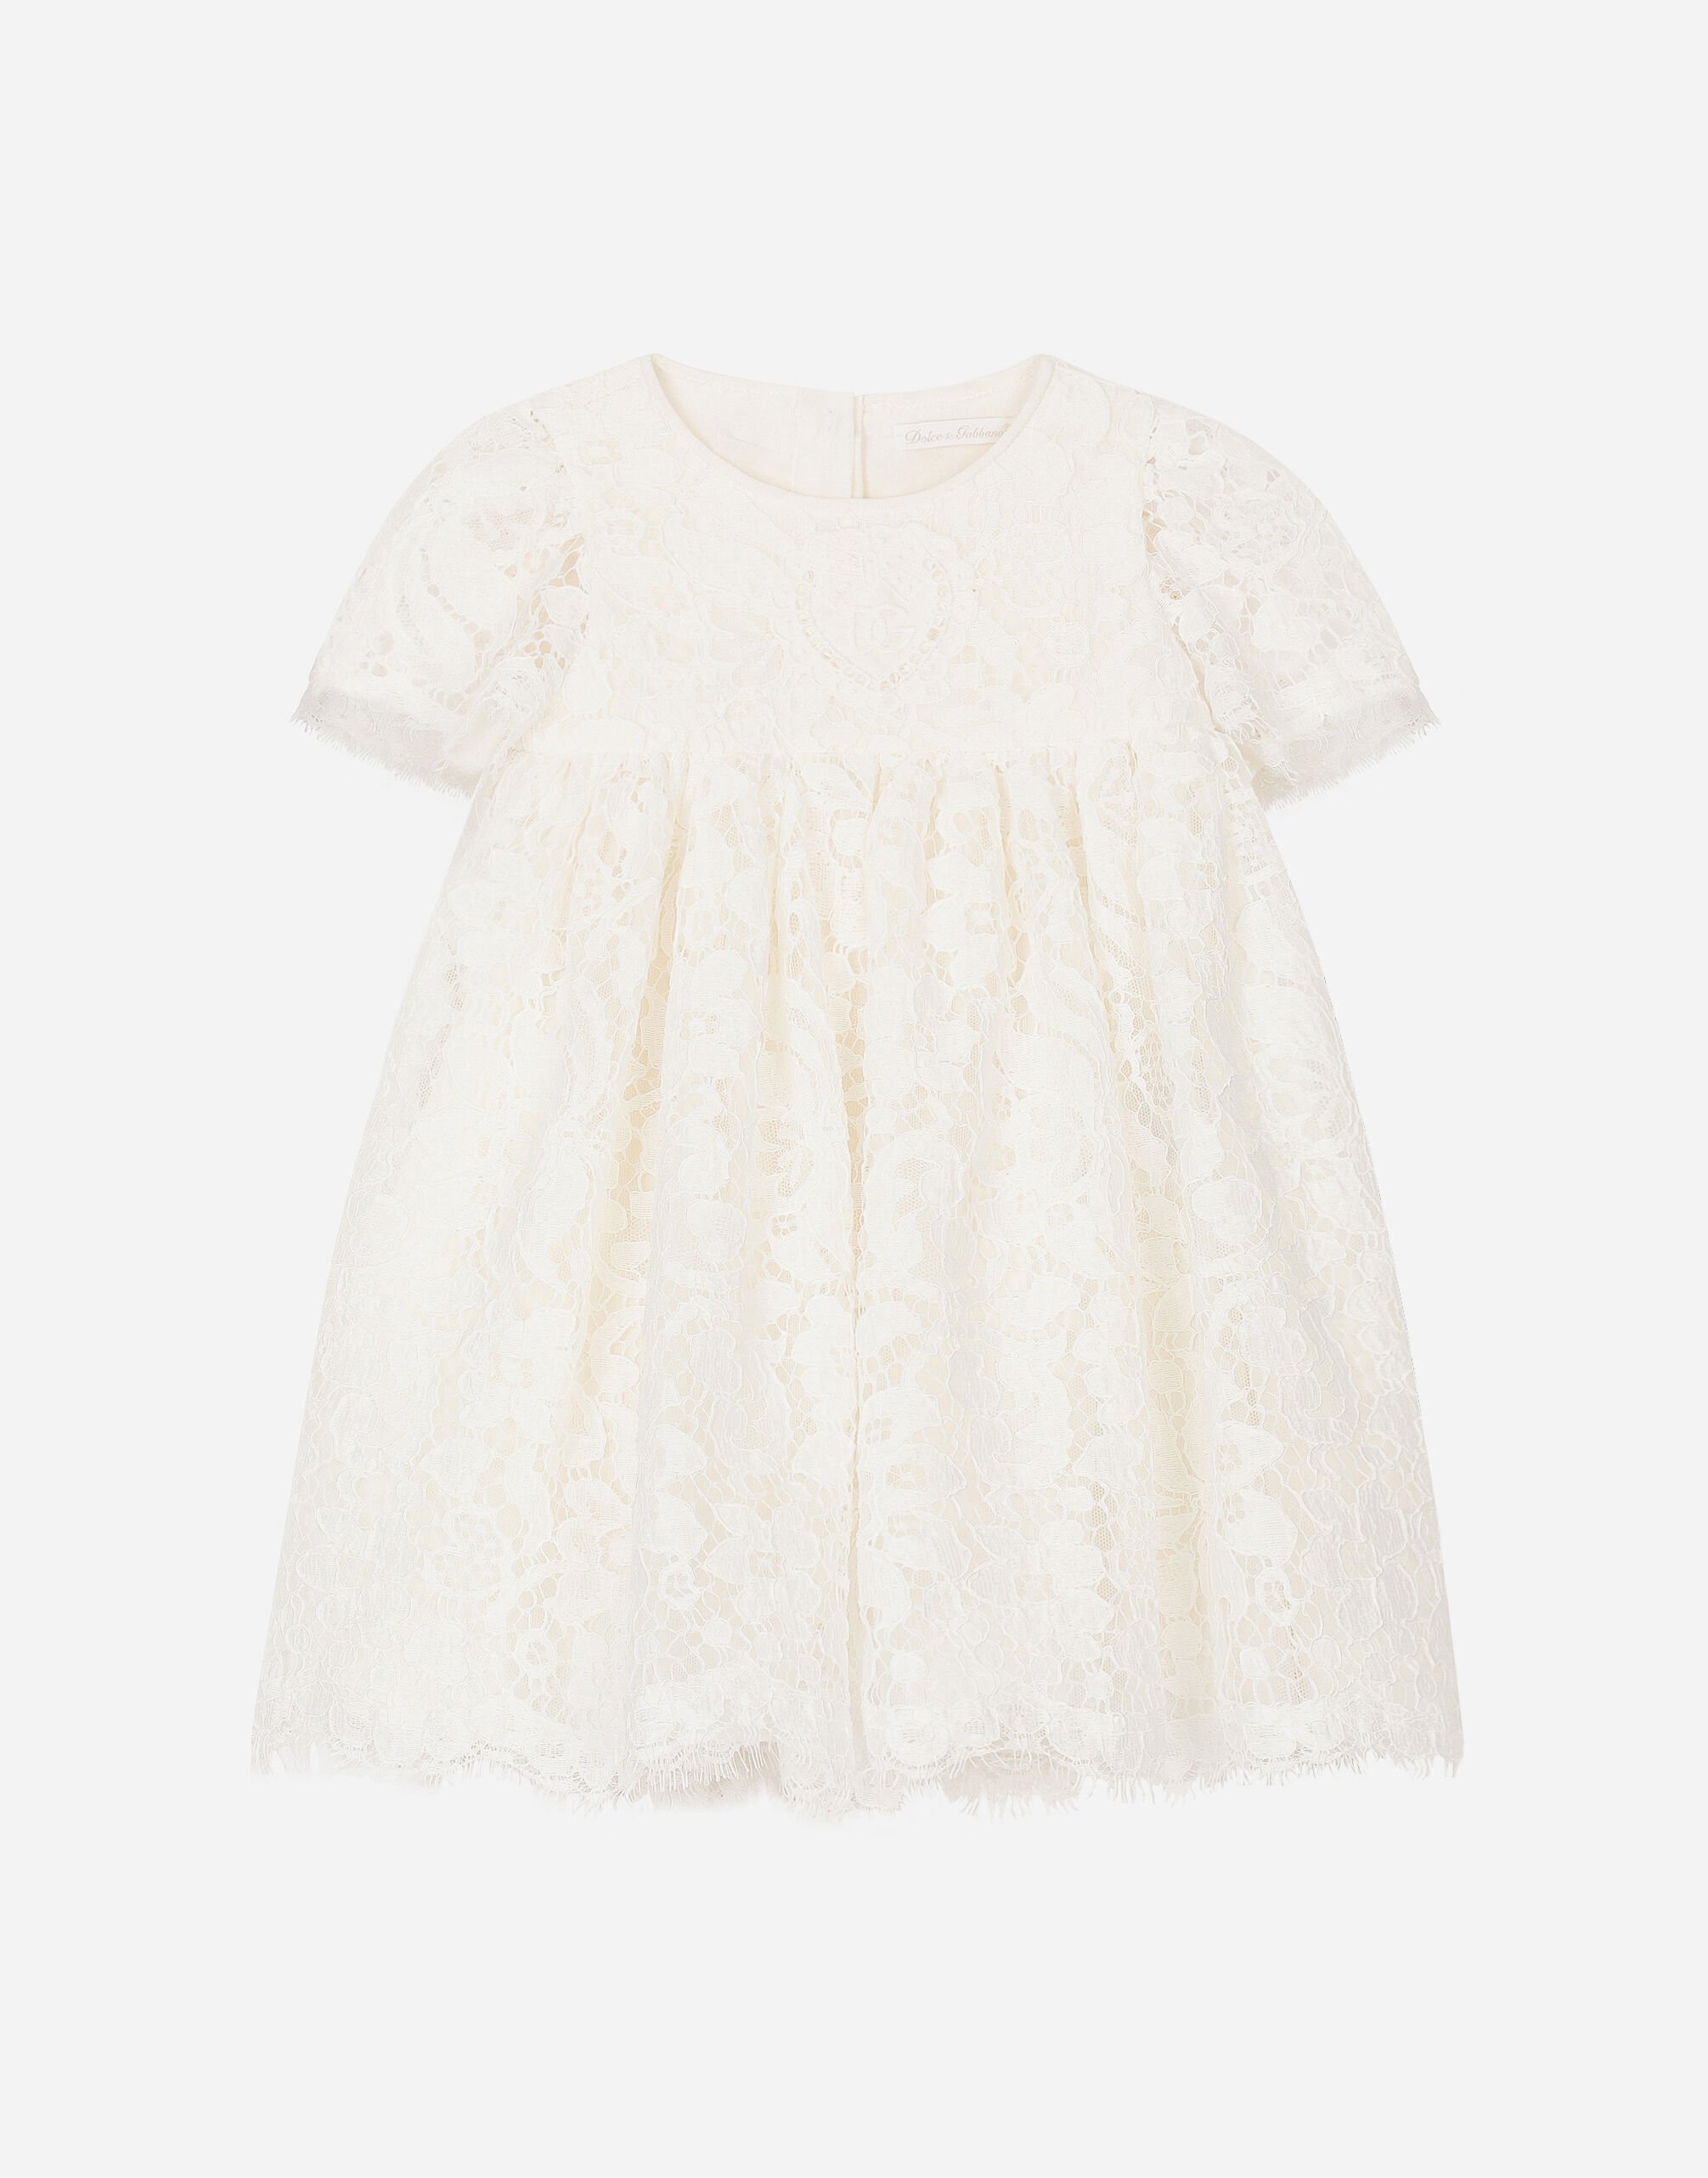 Dolce & Gabbana Empire-line lace christening dress with short sleeves Print L23DP2HS5QR